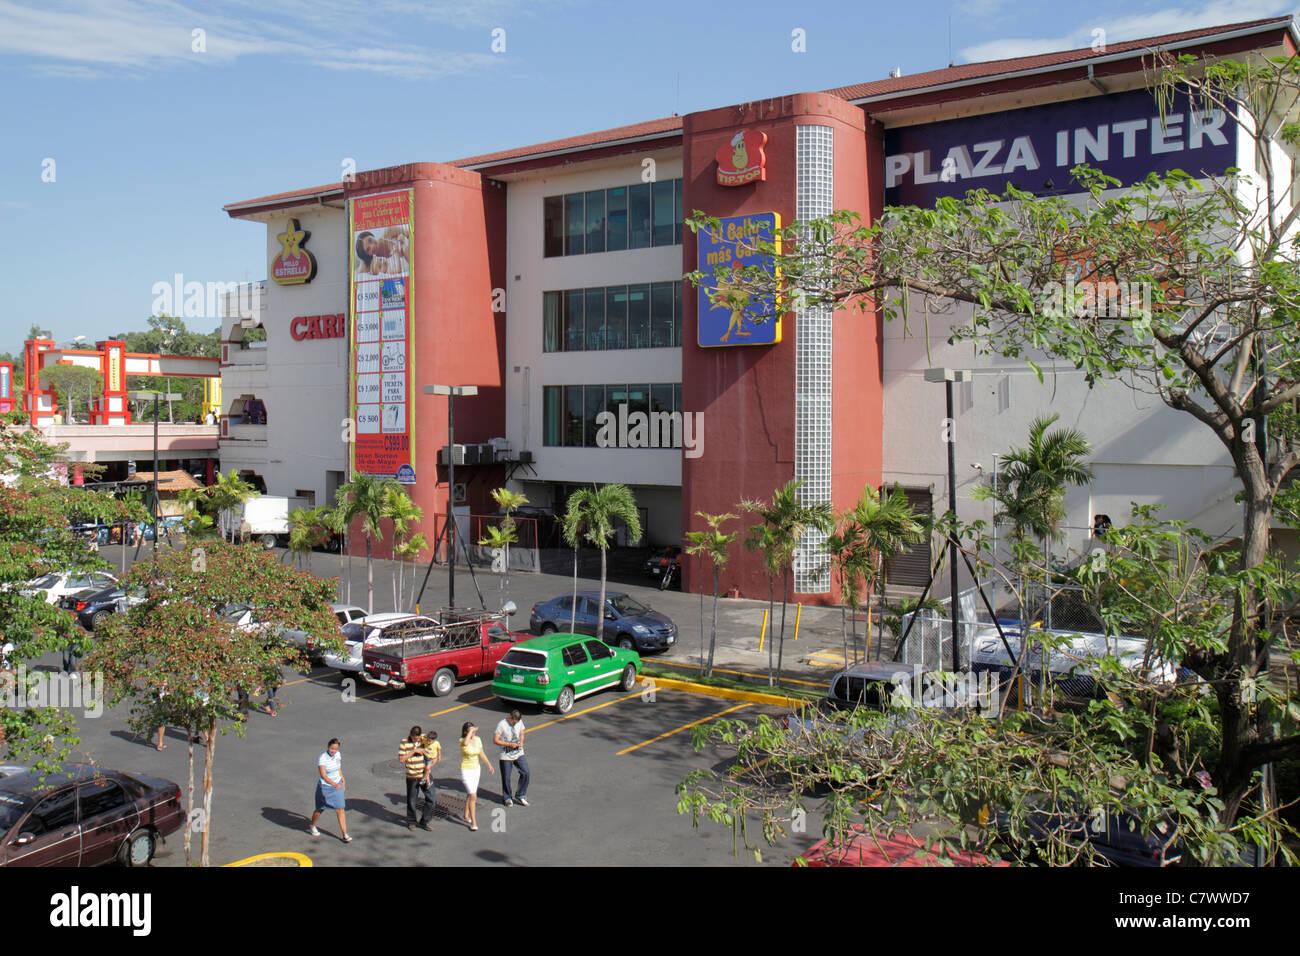 Managua Nicaragua,Central America,Plaza Inter,shopping shopper shoppers shop shops market markets marketplace buying selling,retail store stores busin Stock Photo